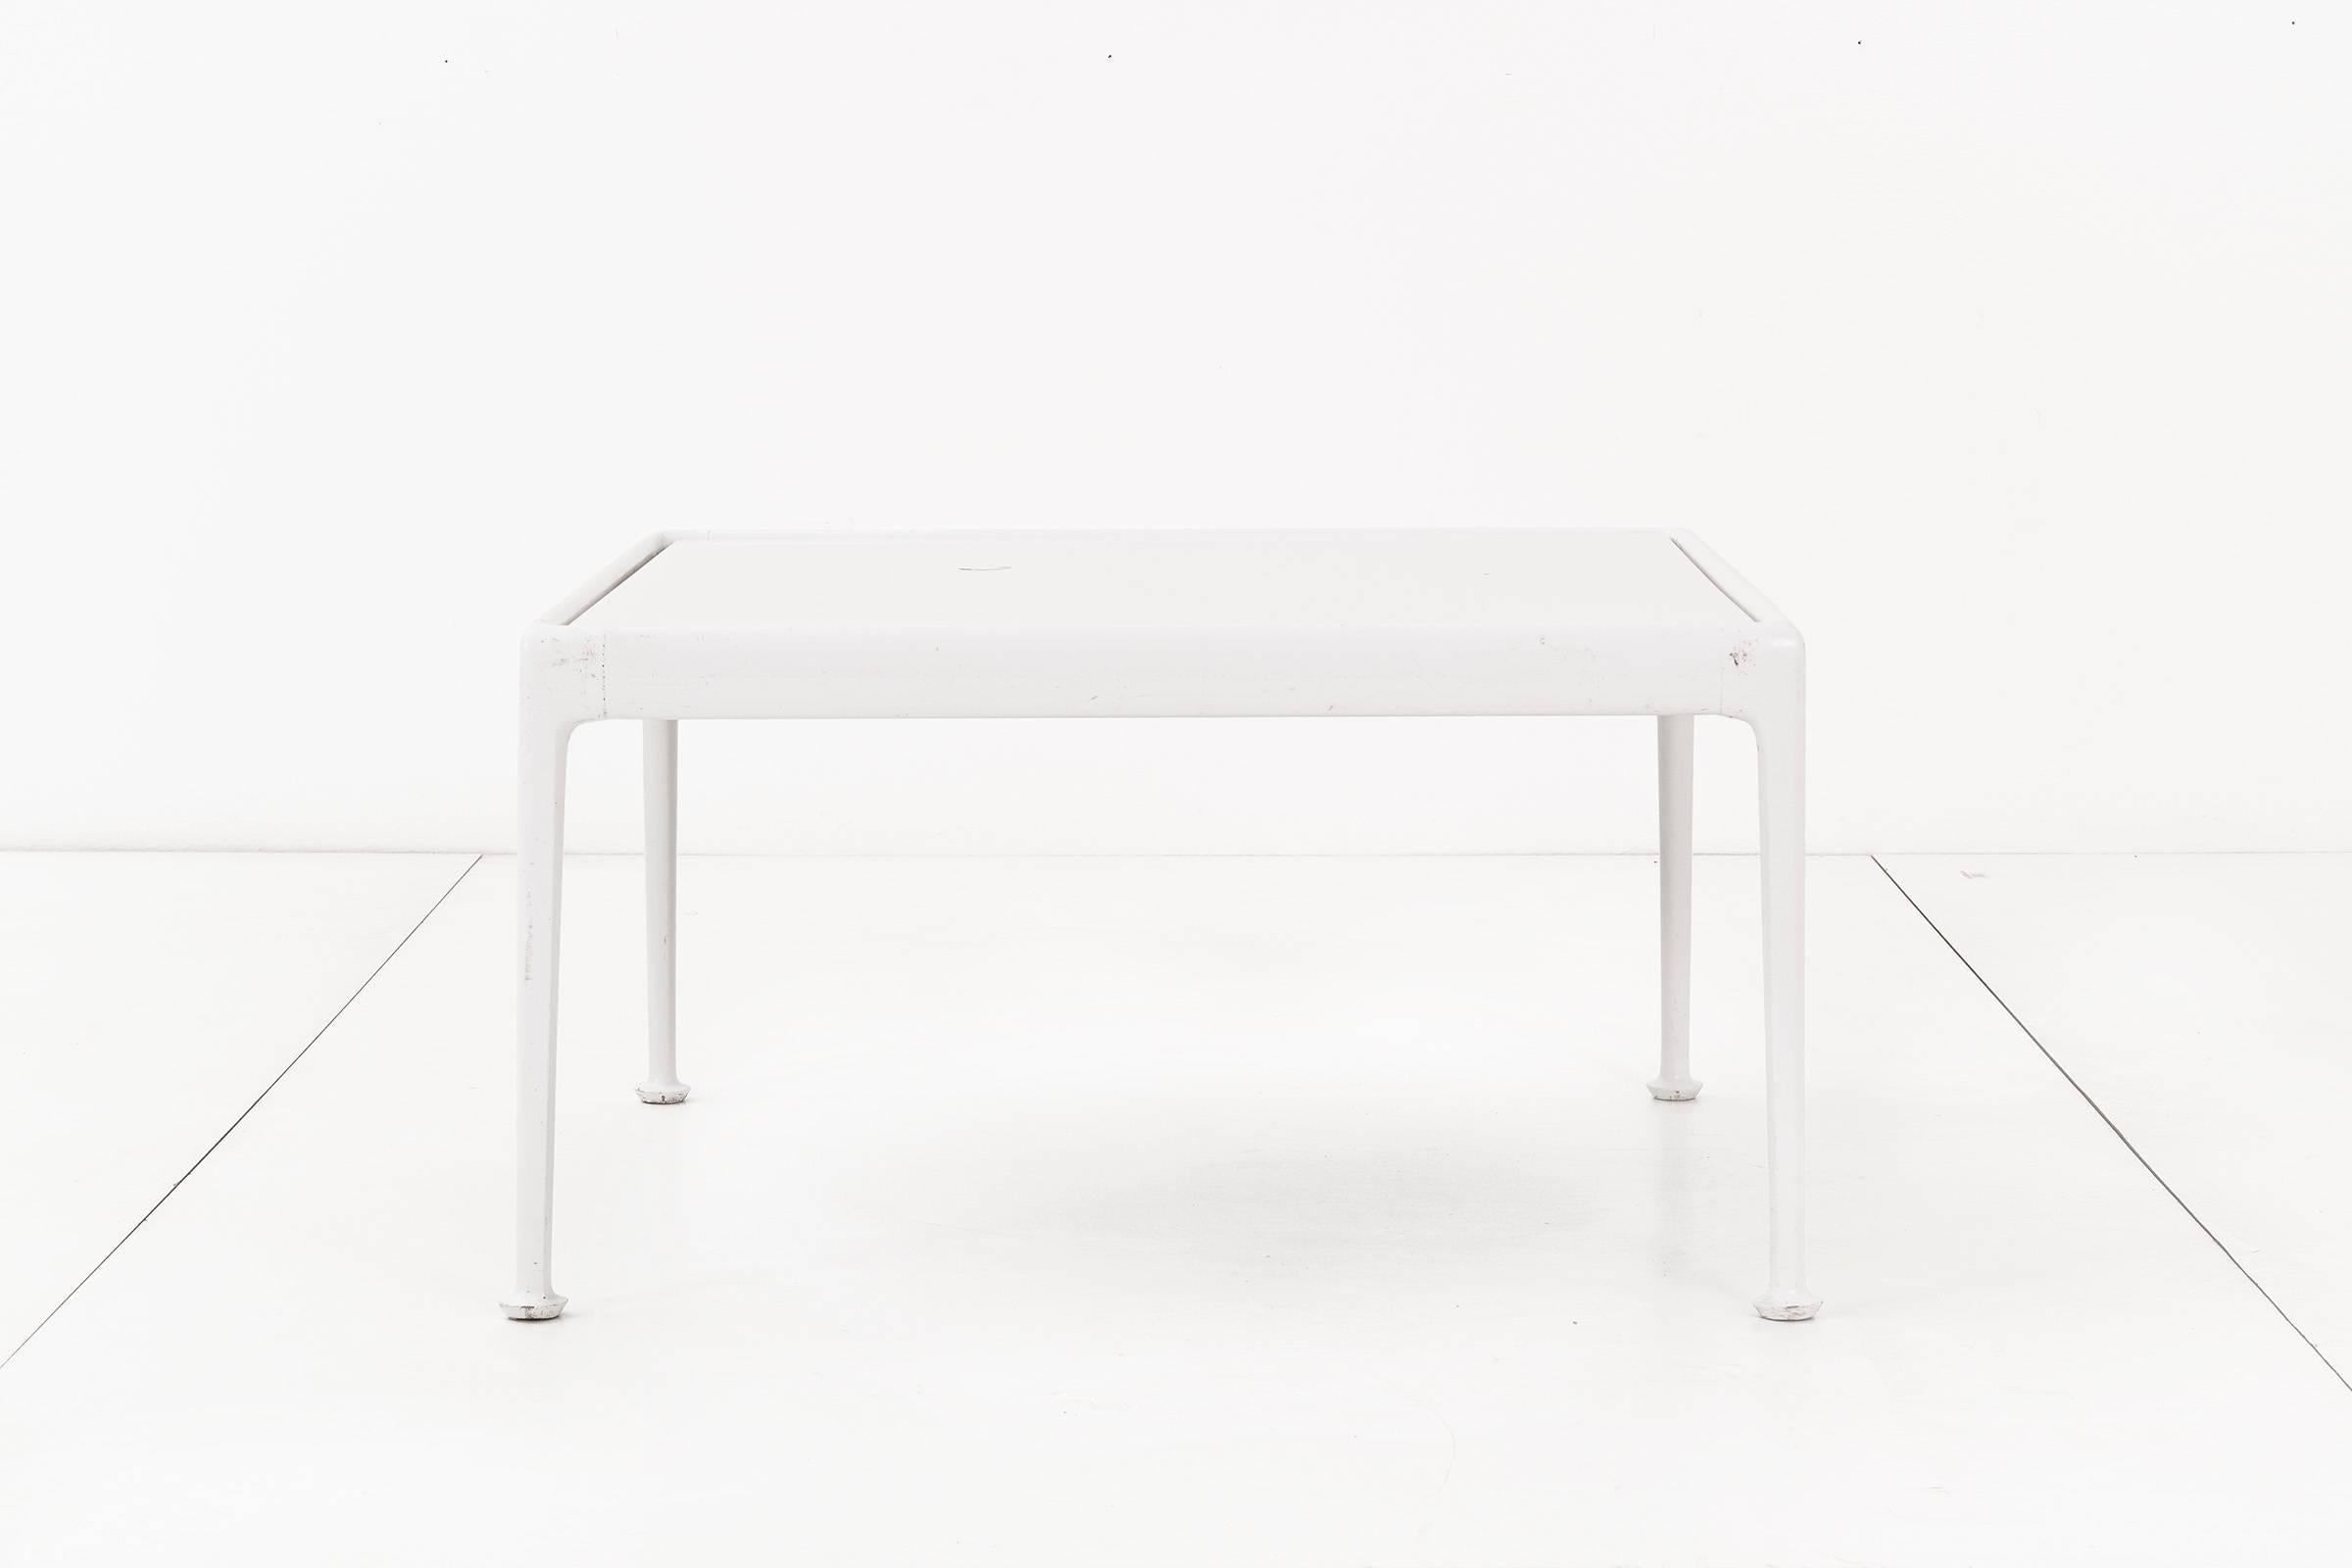 Richard Schultz outdoor coffee table for Knoll. This table has a white powder-coated cast and extruded aluminum frame with white enameled porcelain on steel tabletop. The table has a weather resistant finish and a slight gap between the top and